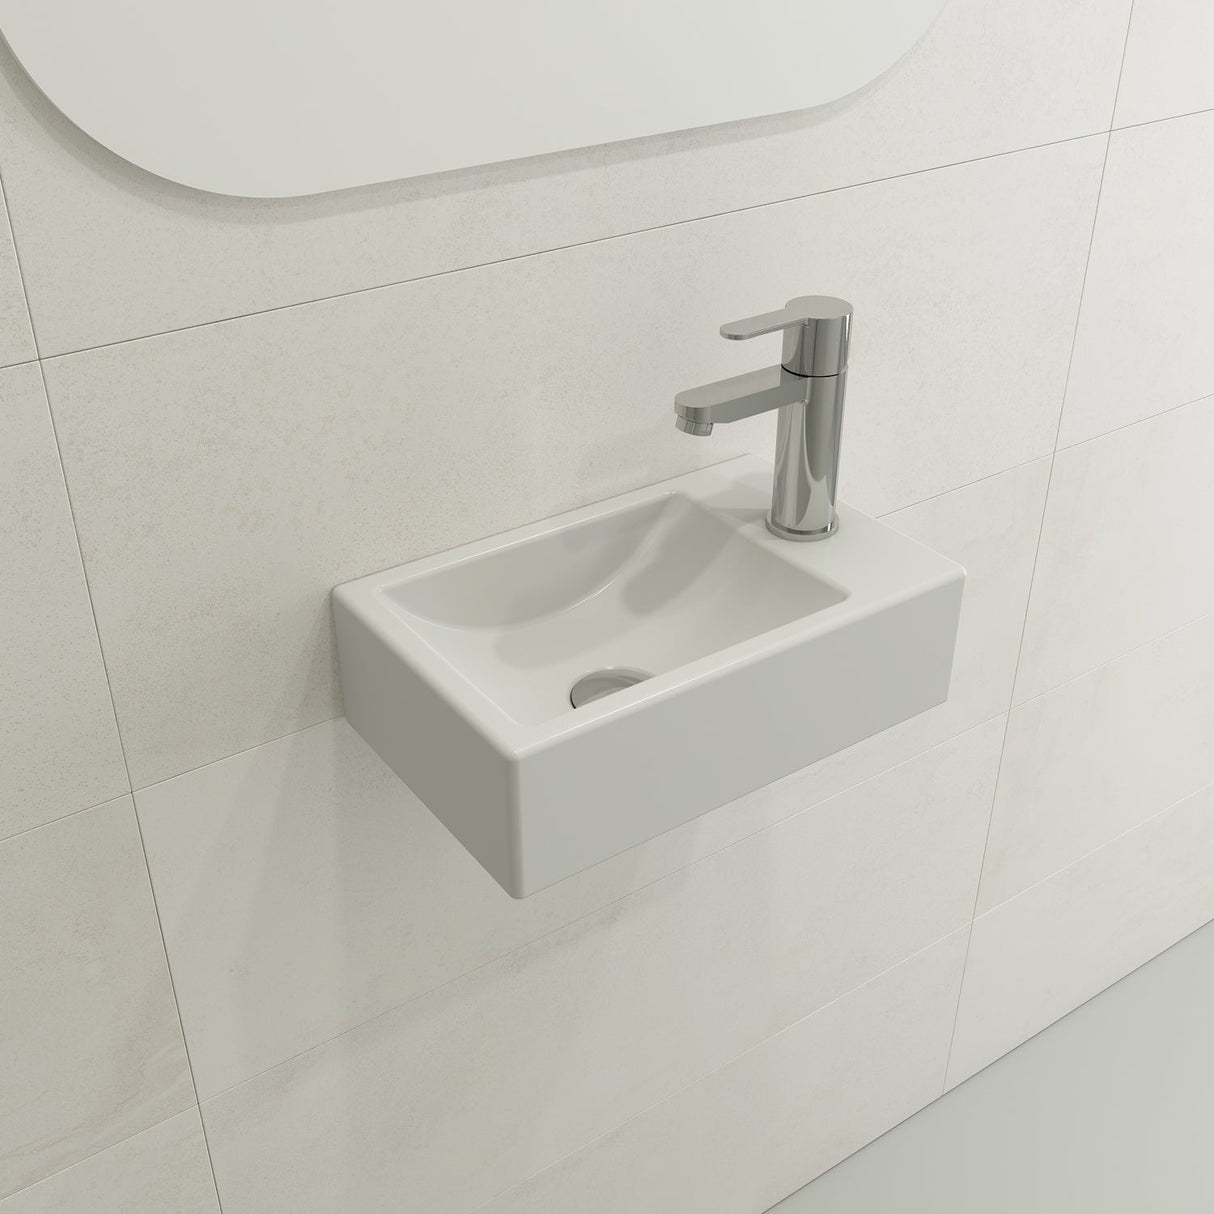 BOCCHI 1419-002-0126 Milano Wall-Mounted Sink Fireclay 14.5 in. 1-hole Right Side Faucet Deck in Matte White